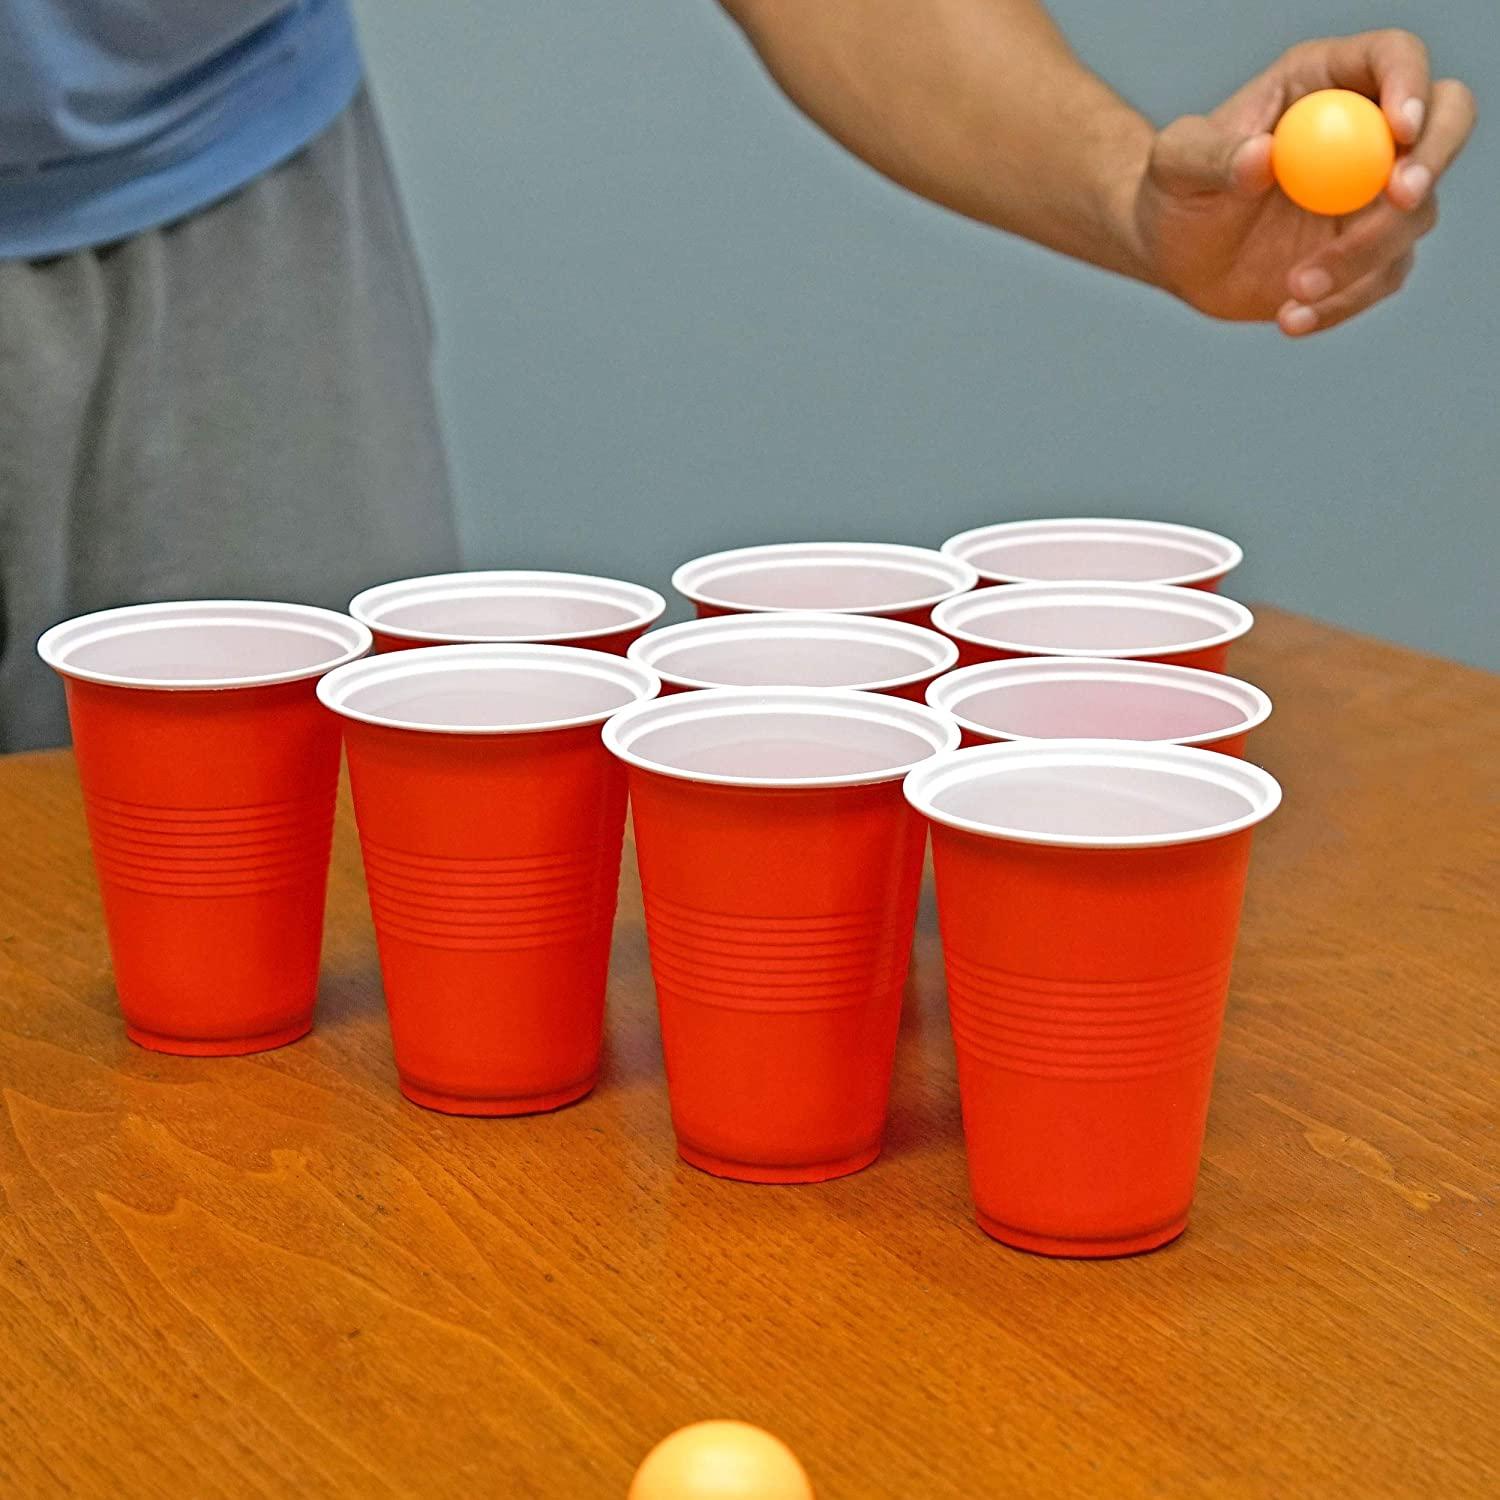 Fairly Odd Novelties Beer Pong Set, Red Cups and Ping Pong Balls